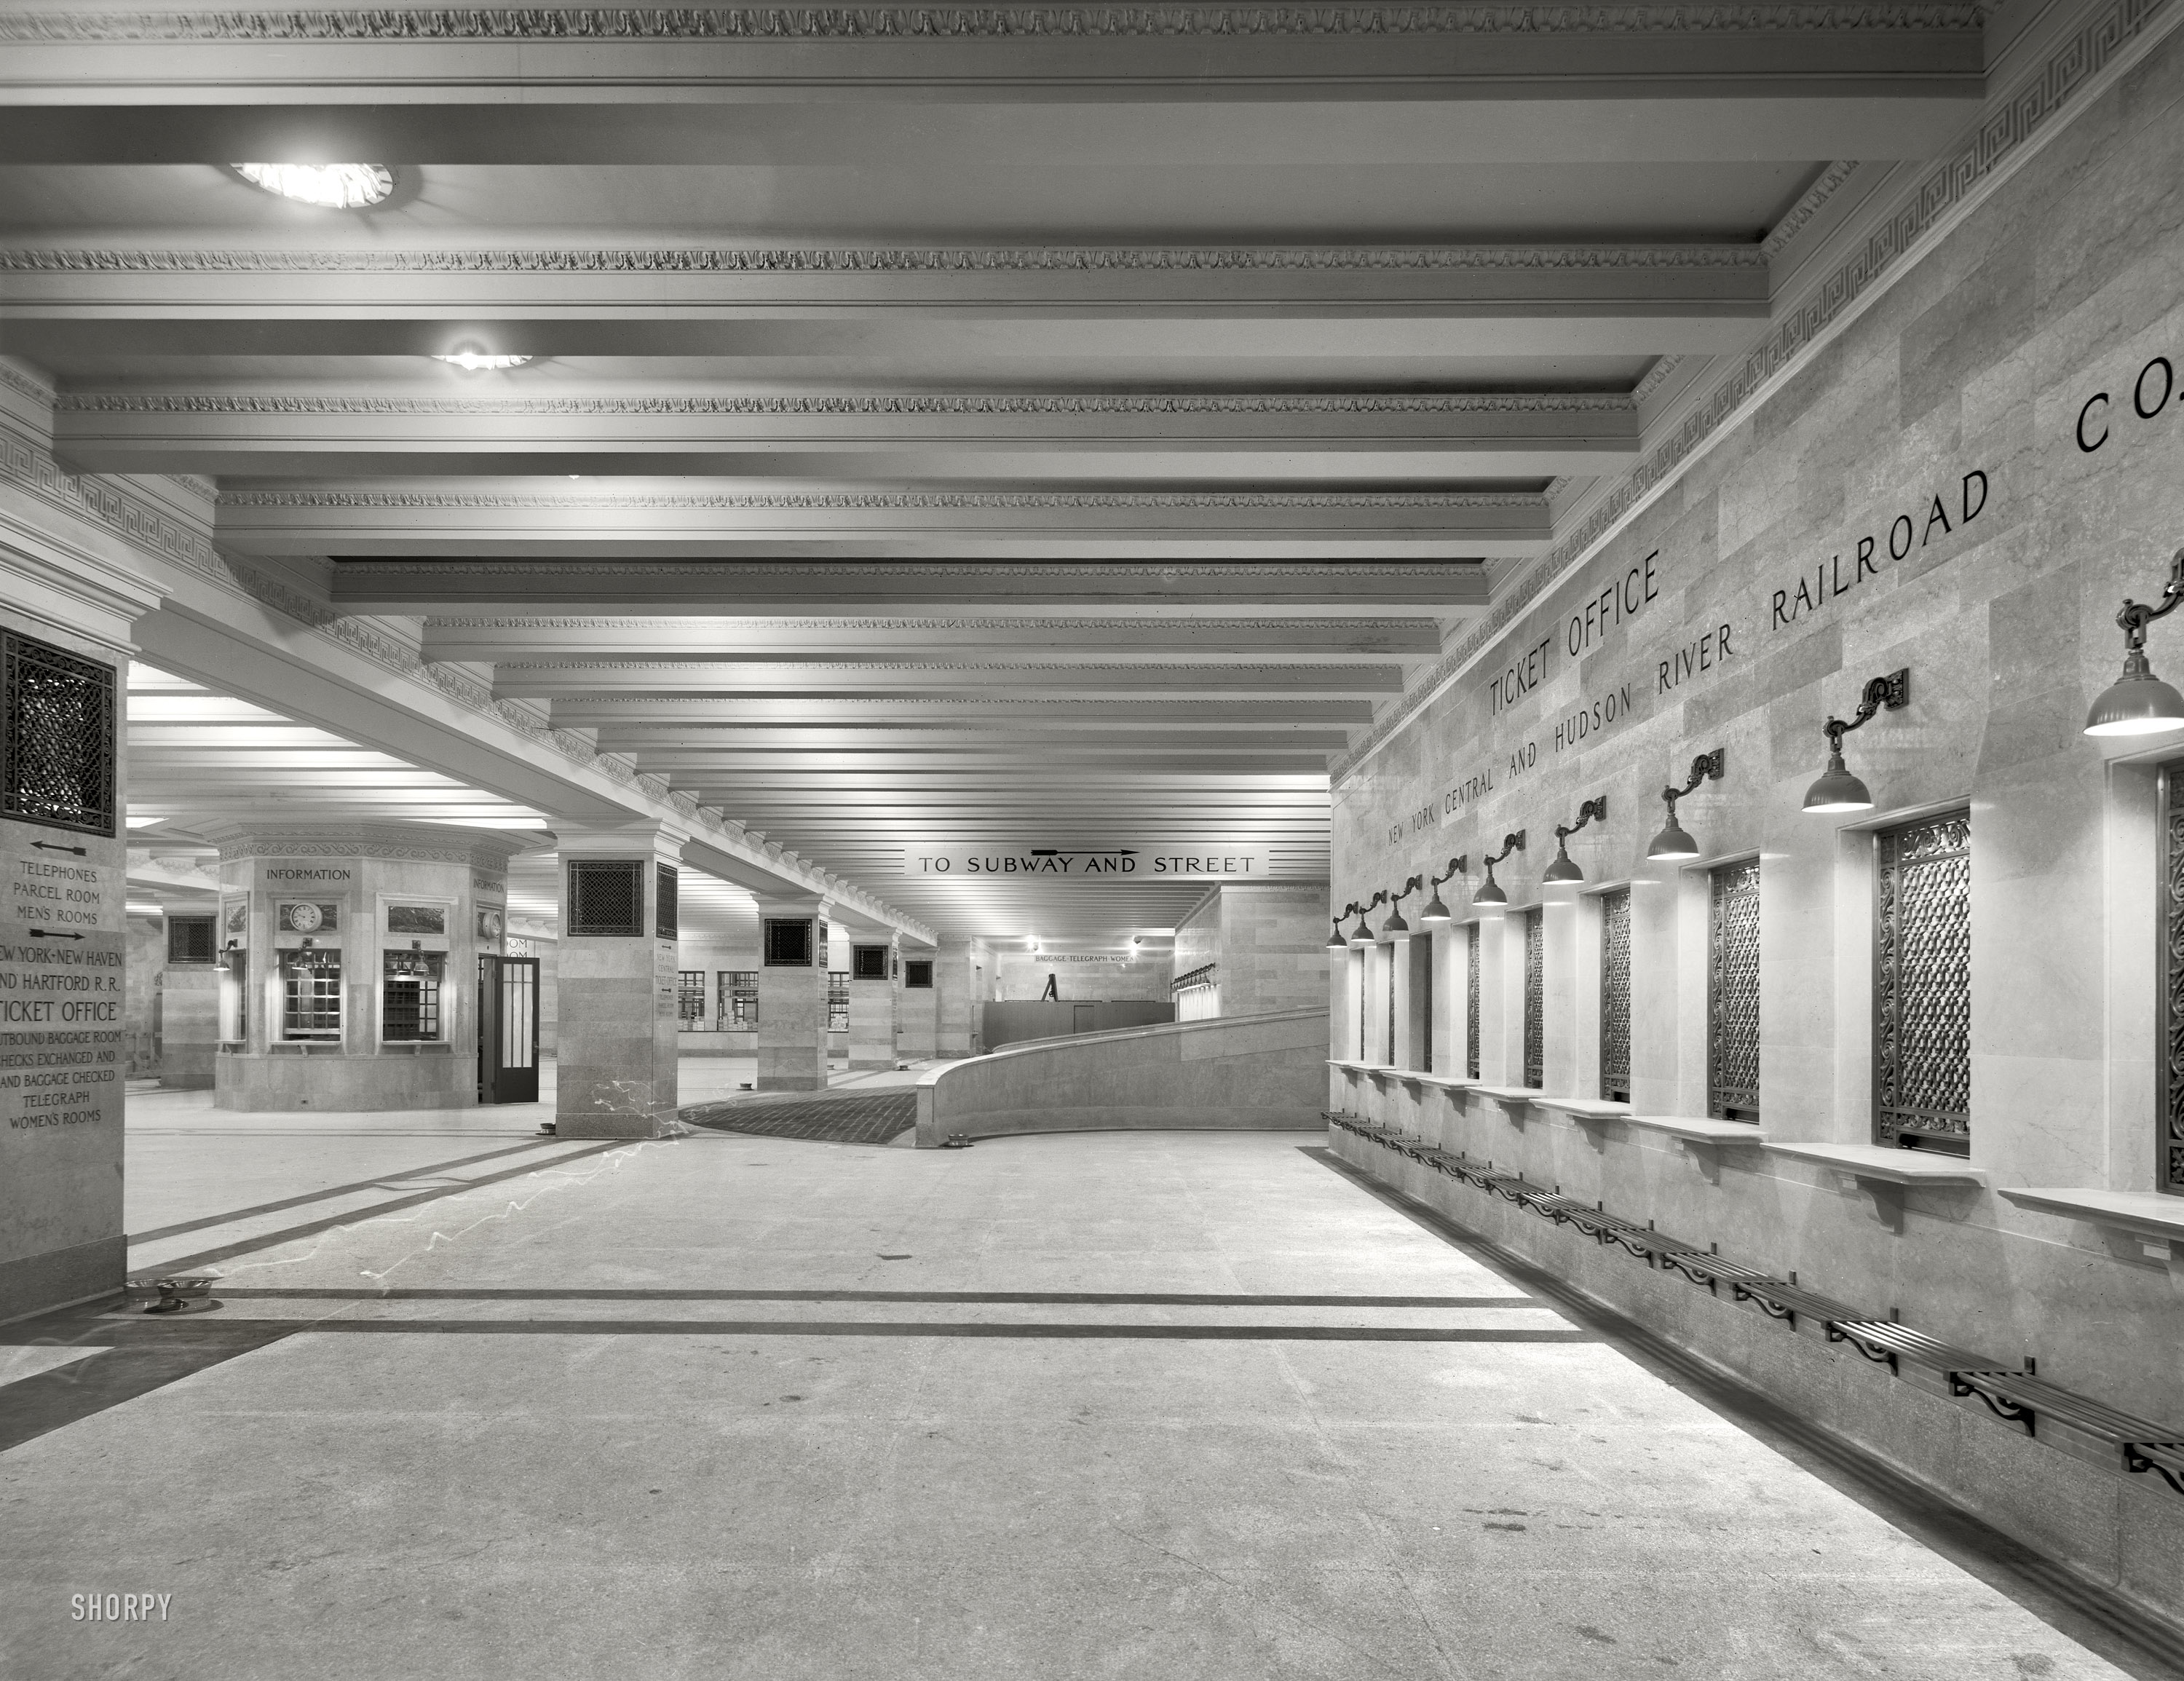 New York circa 1910. "Suburban concourse, Grand Central Terminal, New York Central Railroad." Note the light trail left by a lantern-carrying phantom stroller in this time exposure. 8x10 glass negative, Detroit Publishing Co. View full size.